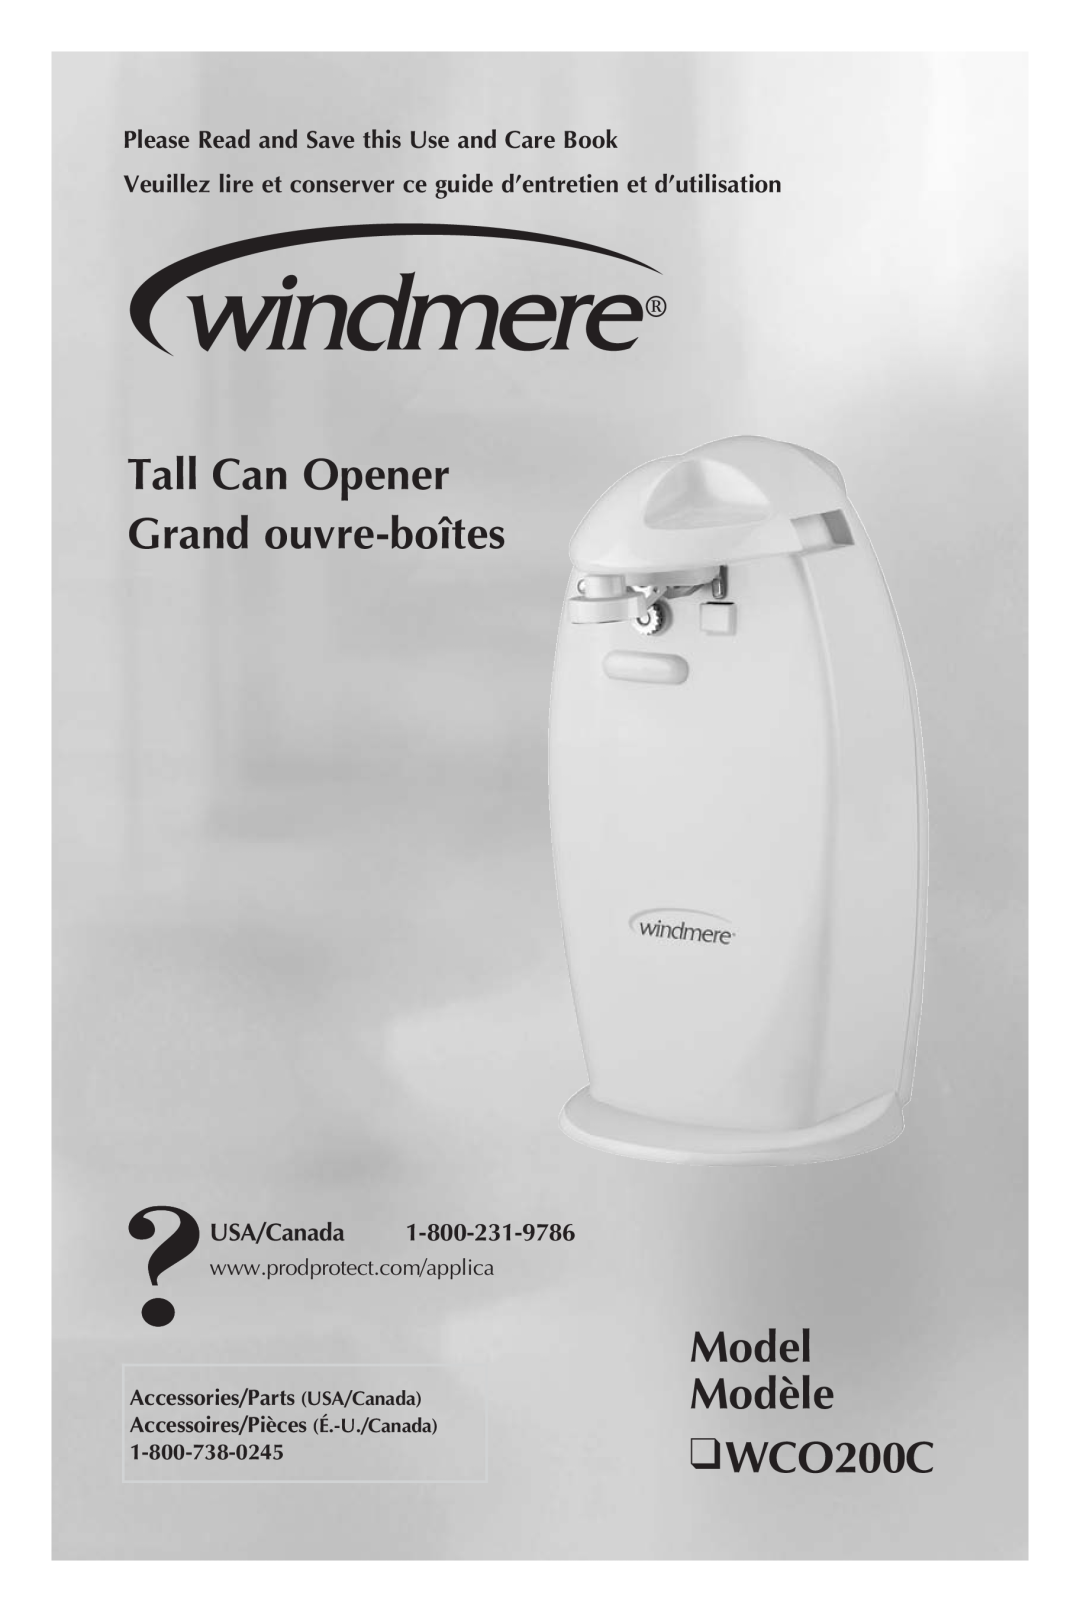 Windmere manual Tall Can Opener Grand ouvre-boîtes, Model Modèle WCO200C, Please Read and Save this Use and Care Book 